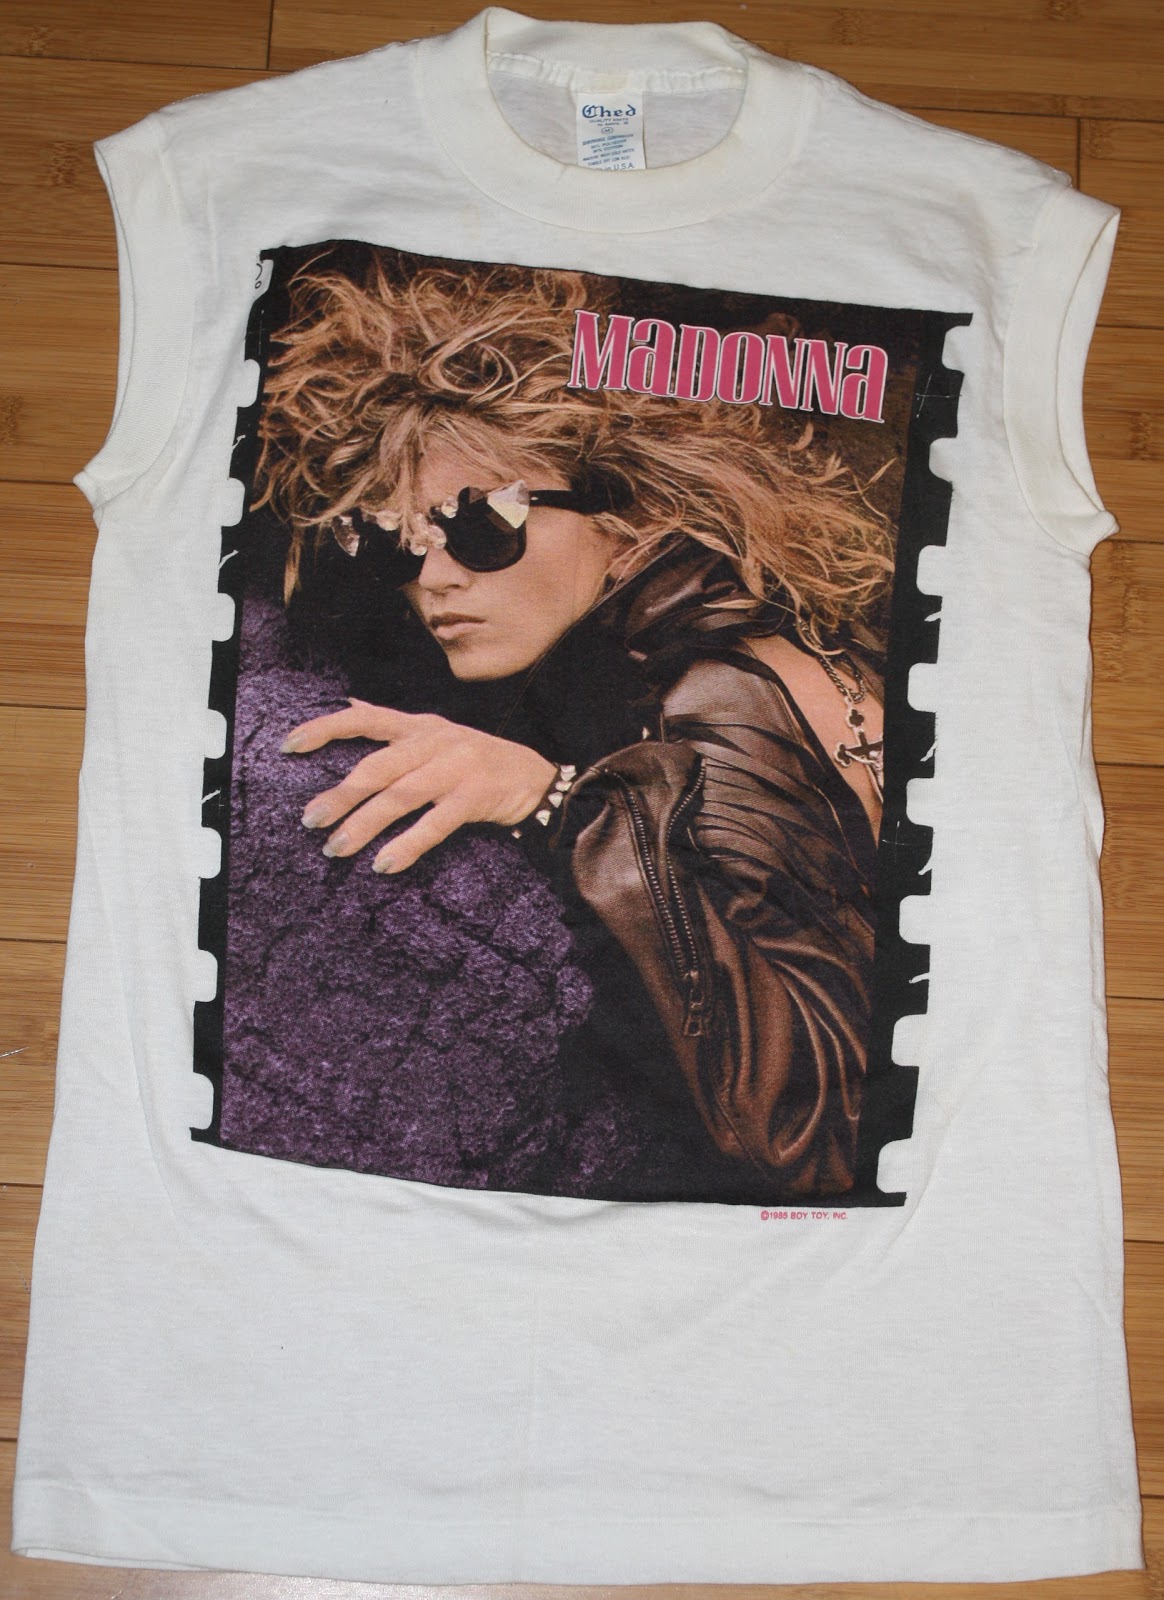 MADMUSIC1: My Madonna Collection: T-SHIRT: The Virgin Tour 1985